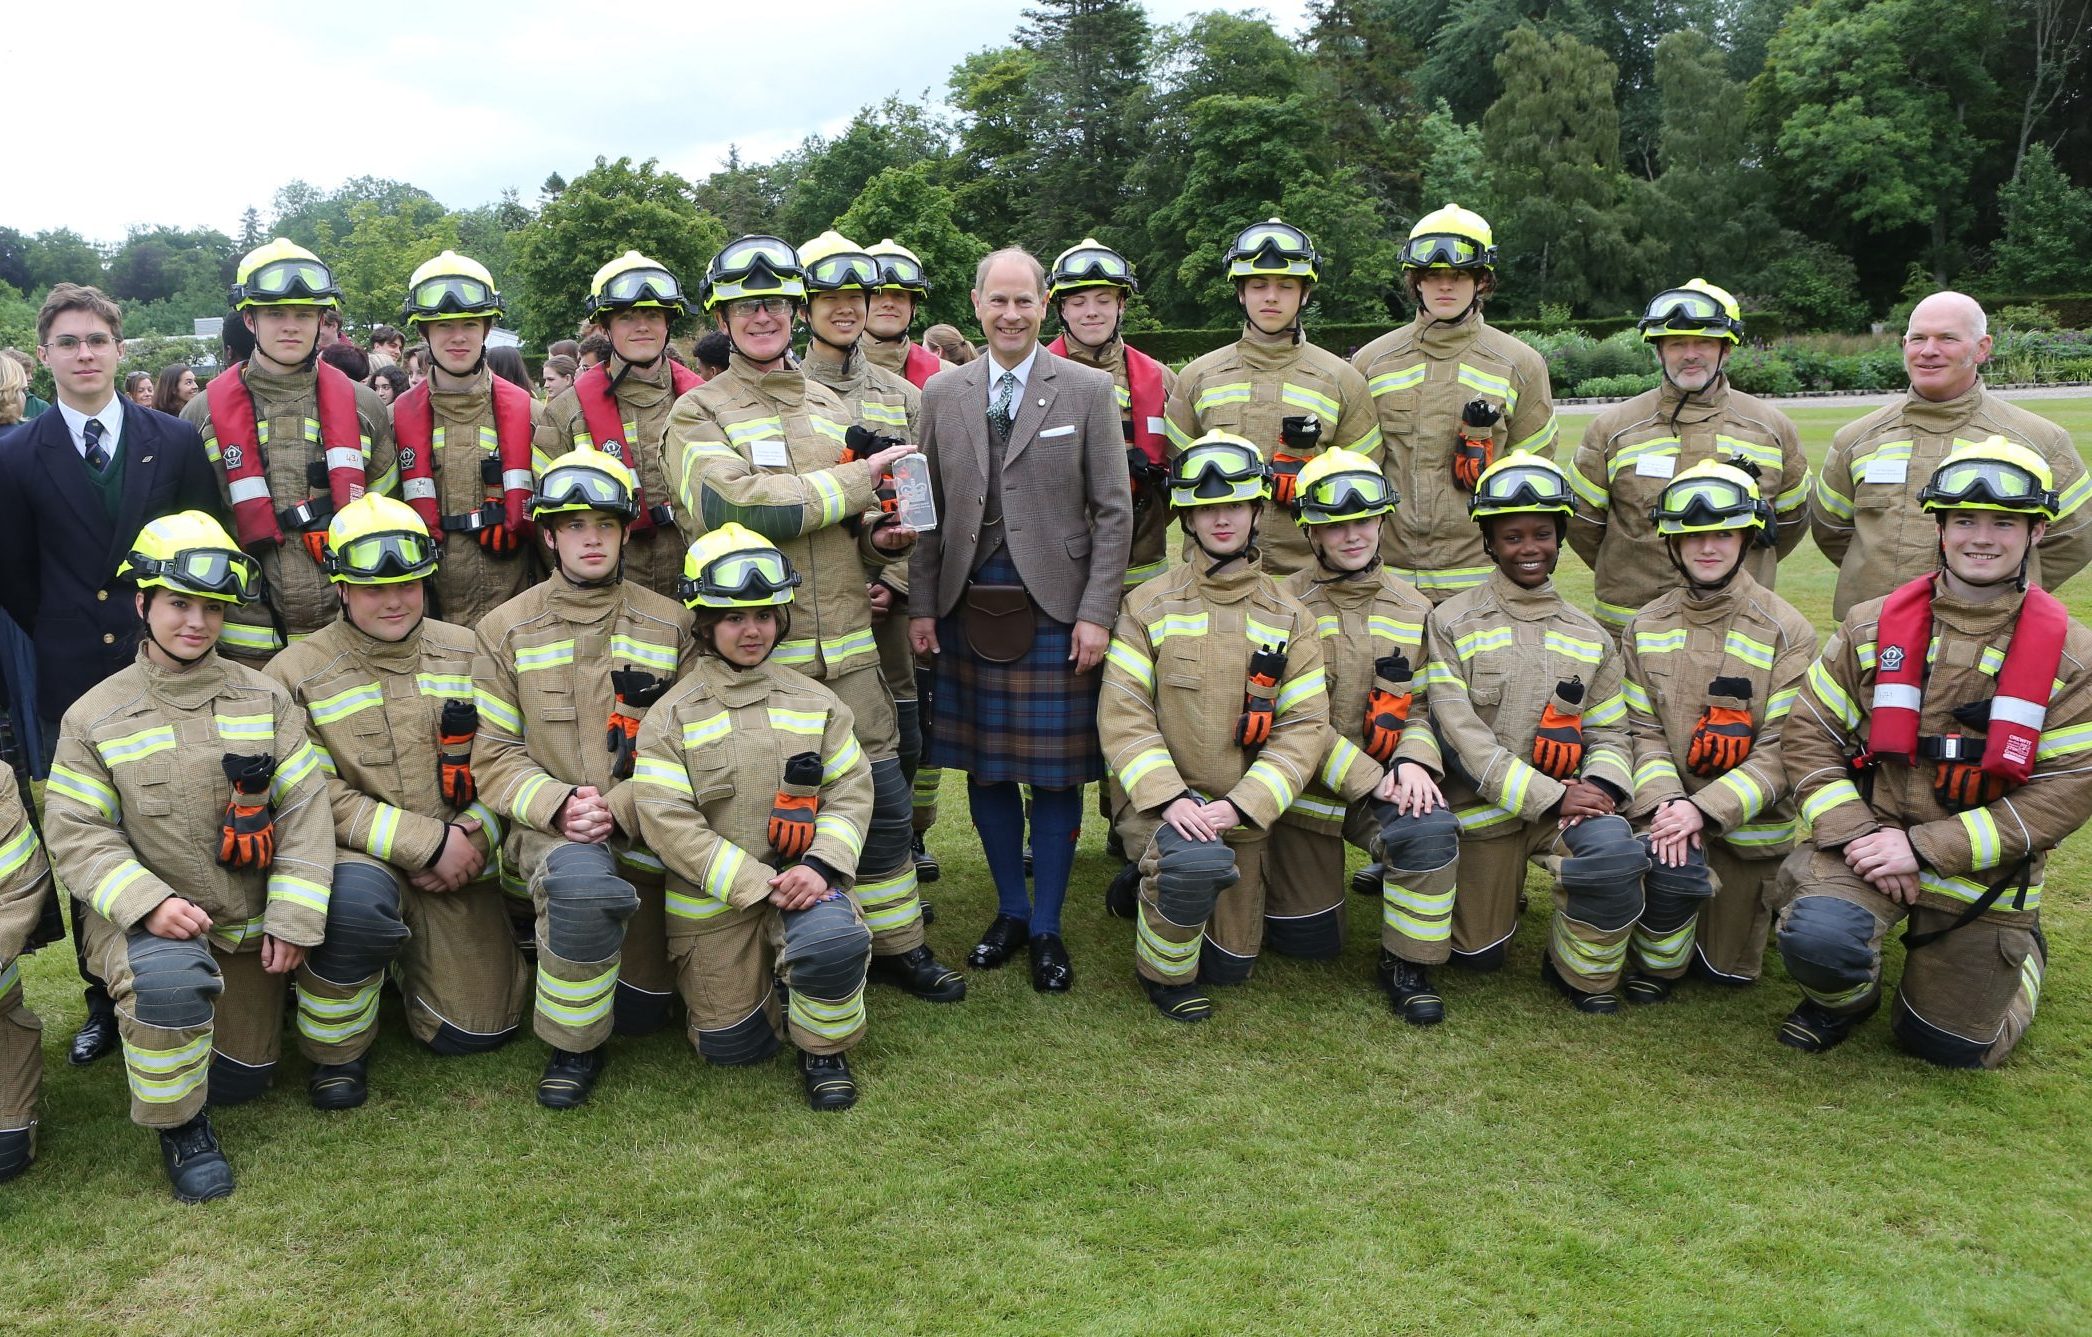 Prince Andrew with the Gordonstoun Fire Service